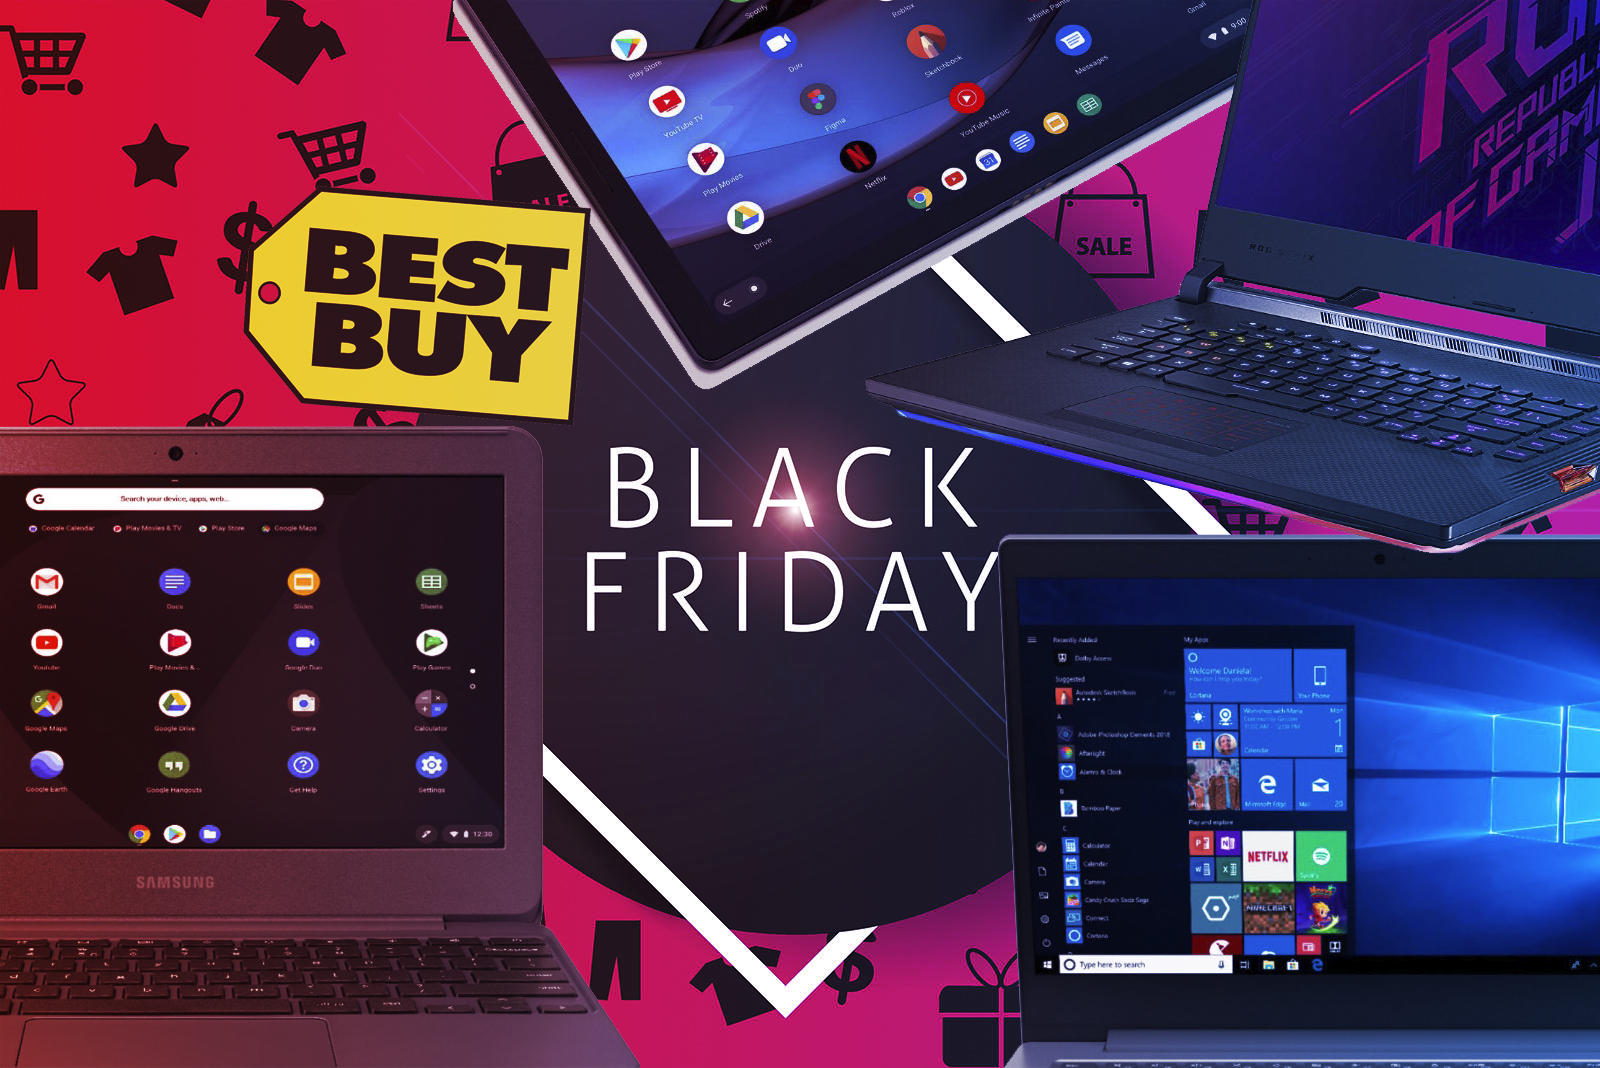 Black Friday As Best Time For Shopping